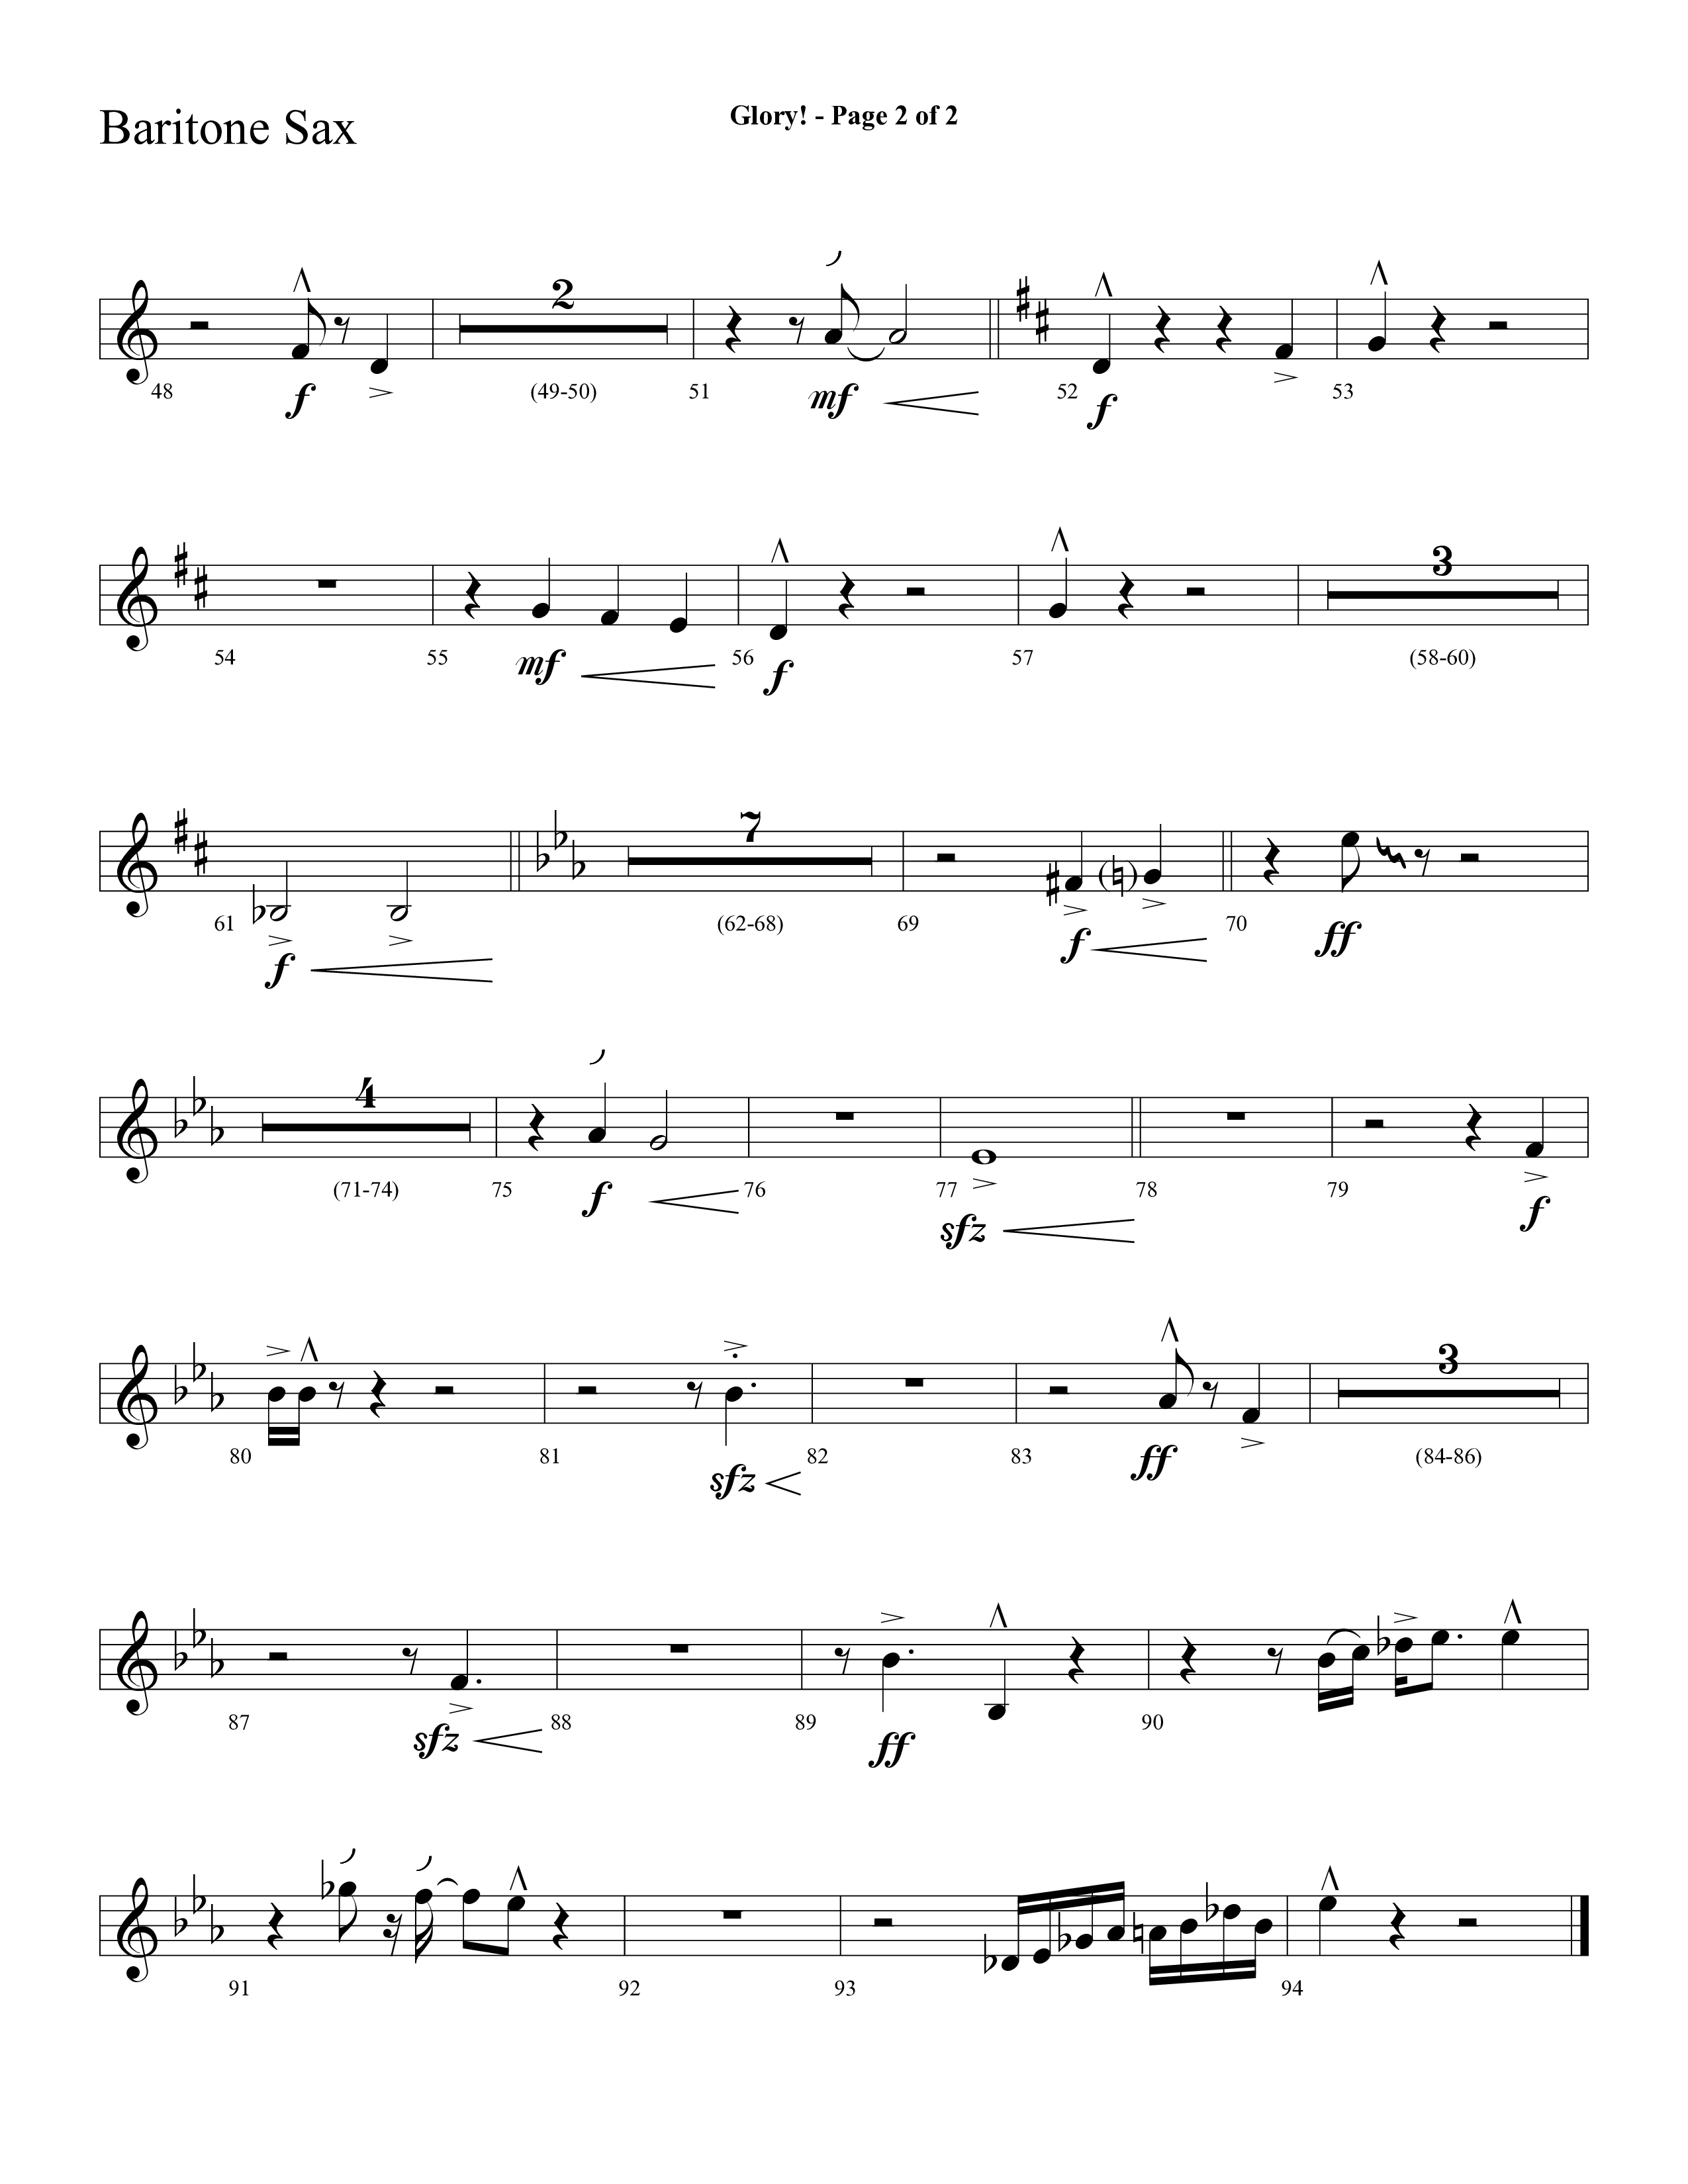 Glory (with Glory To His Name, Grace Greater Than Our SIn) (Choral Anthem SATB) Bari Sax (Lifeway Choral / Arr. Cliff Duren)